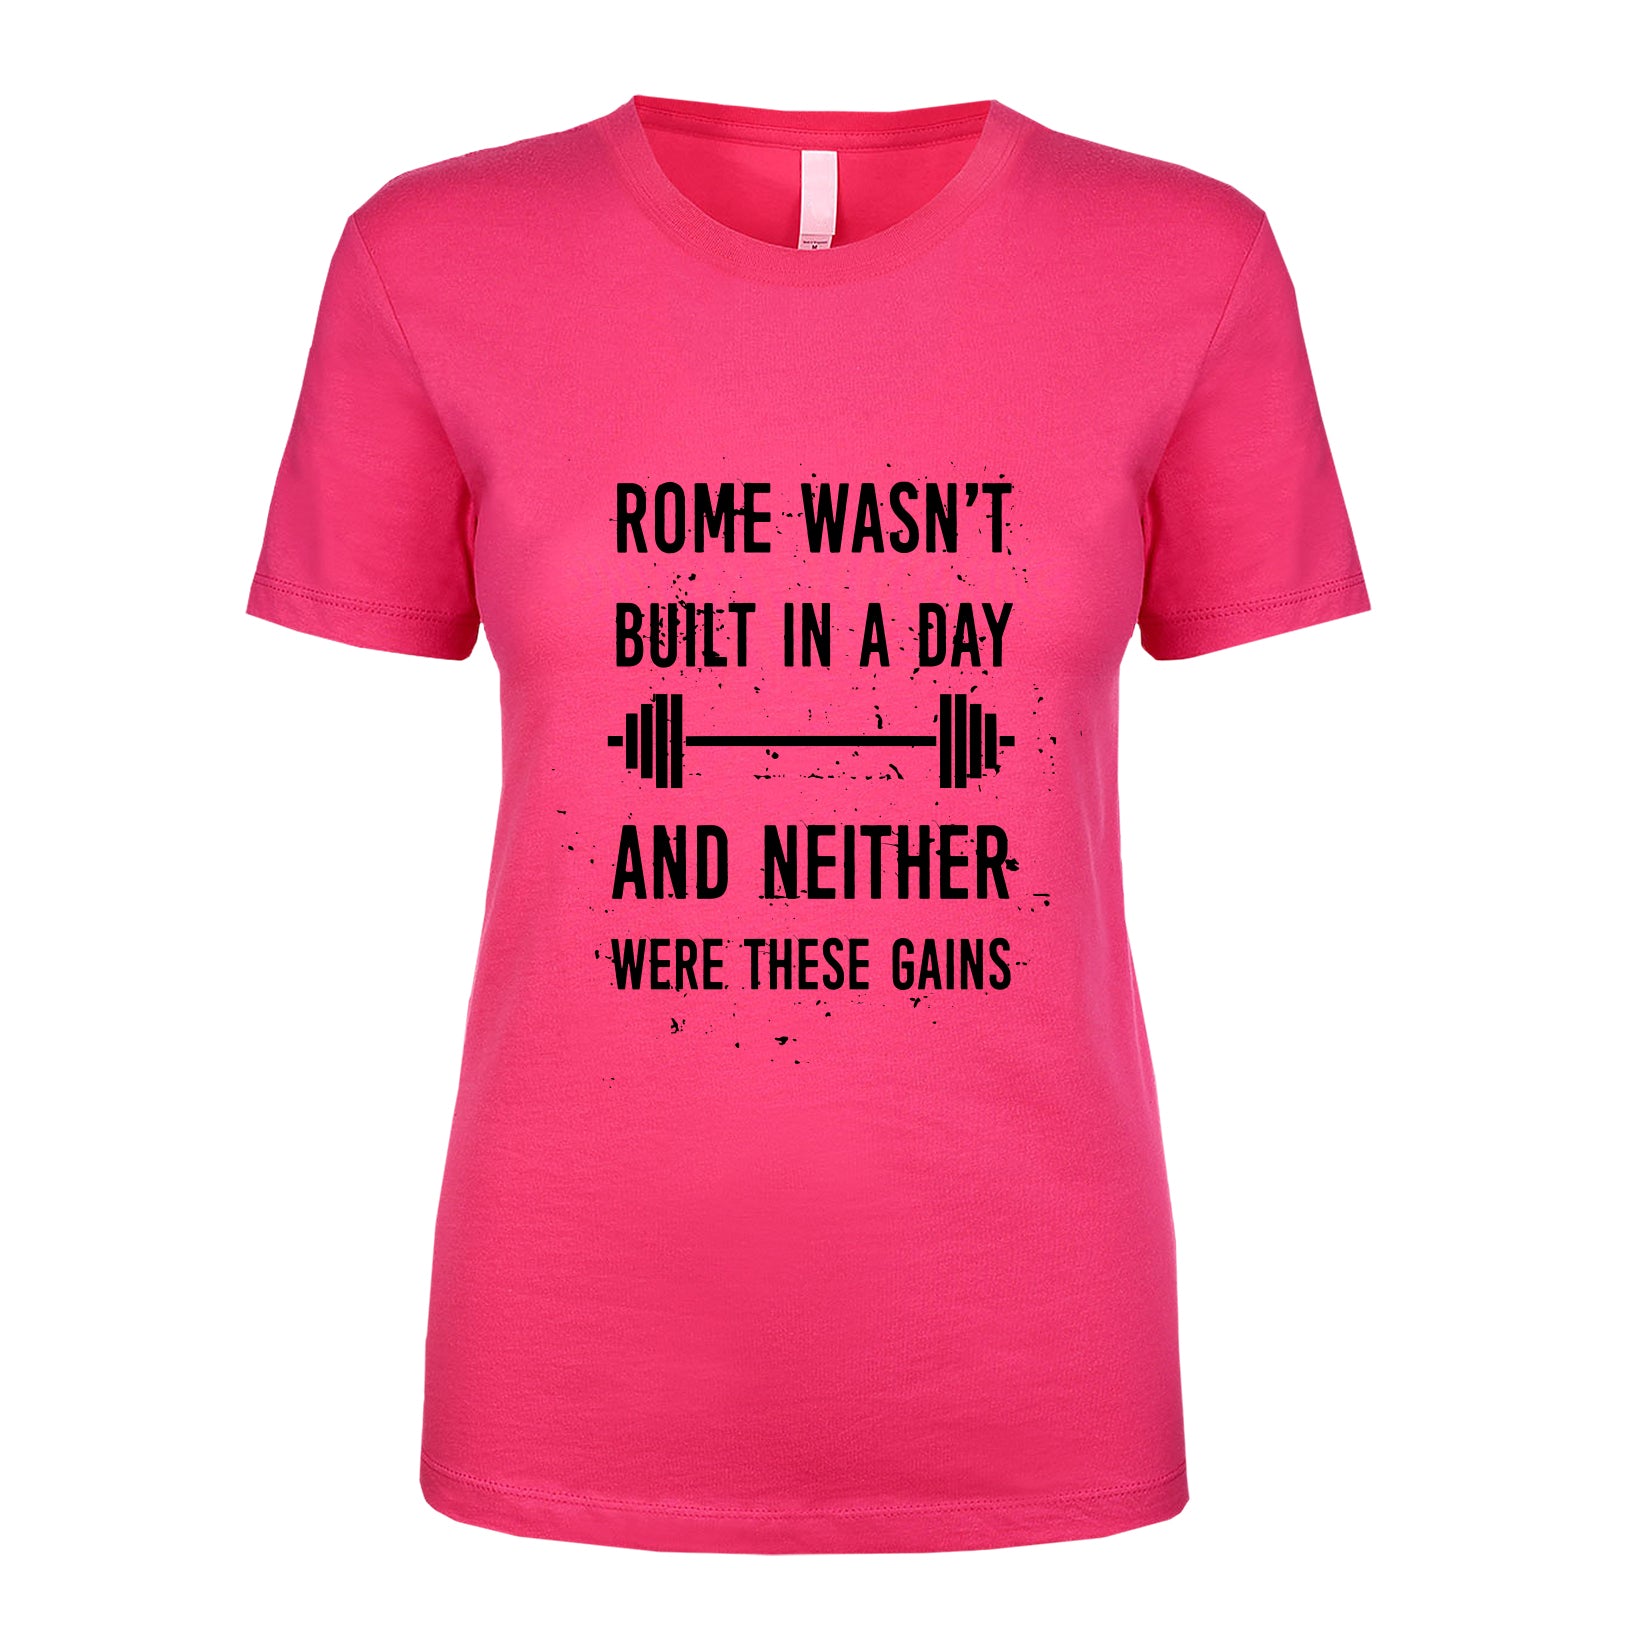 Rome Wasn't Built In A Day And Neither Were These Gains Women's Shirt